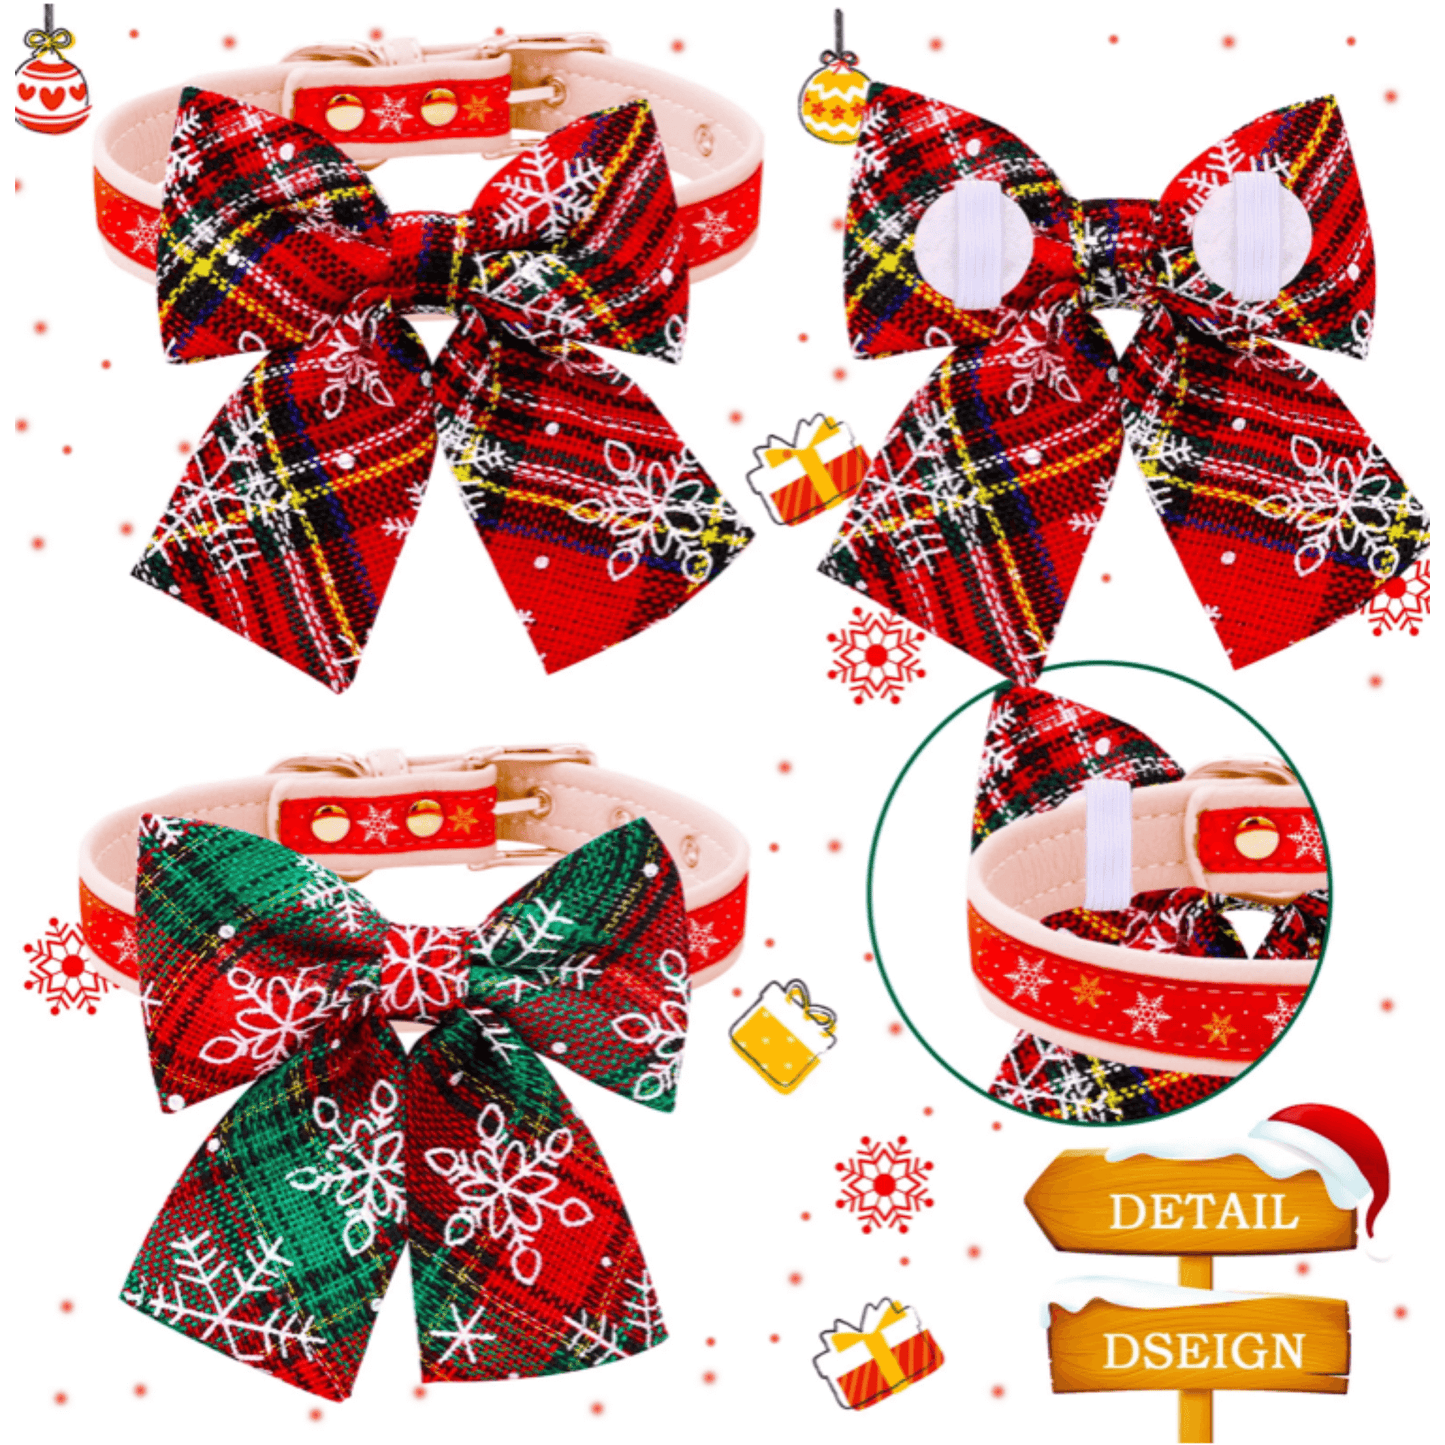 Christmas themed dog bow let's pawty 